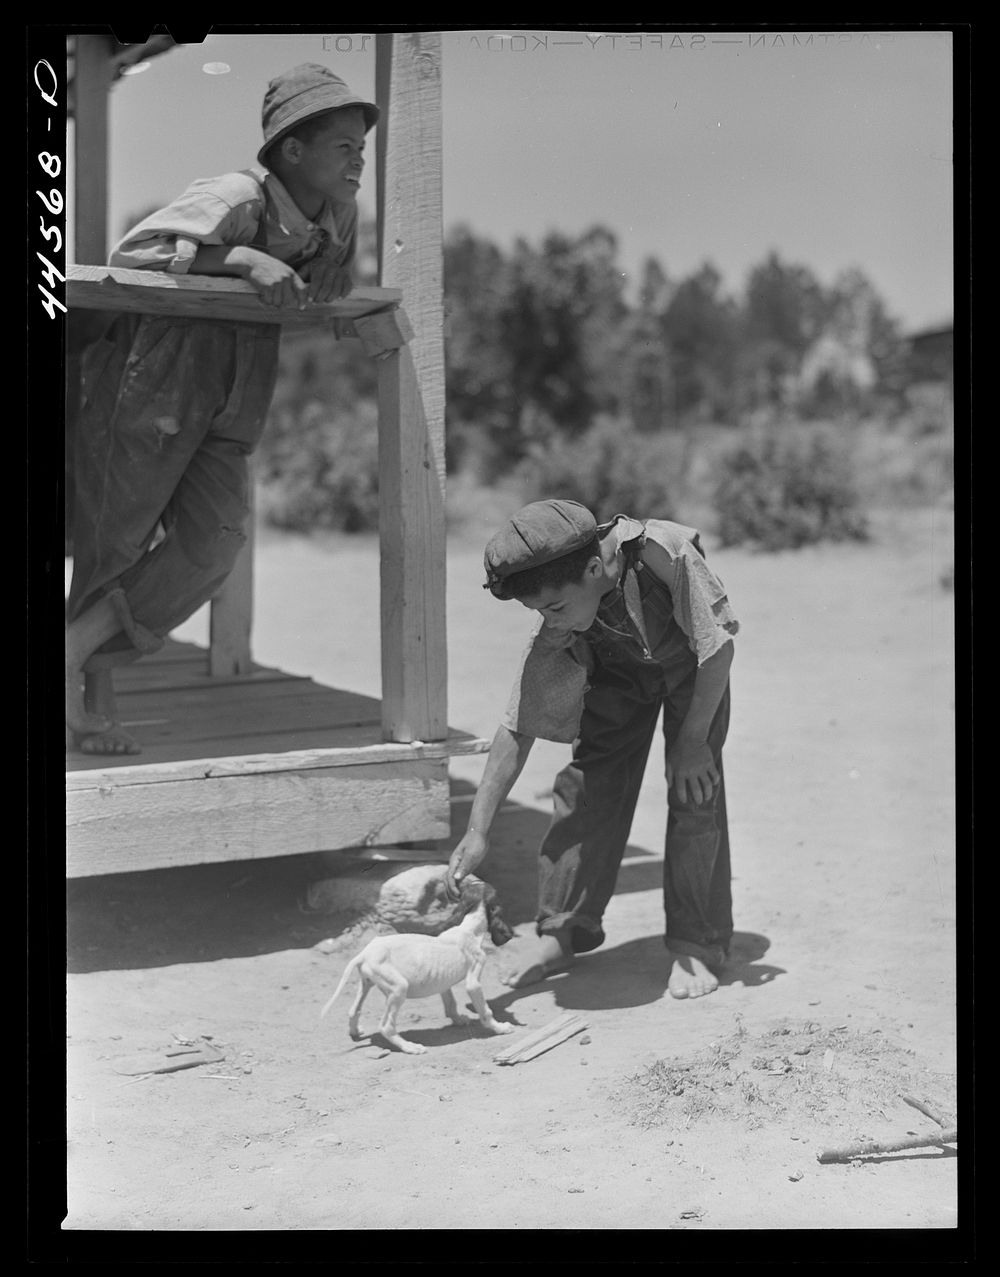 Two of the children of R. L. Smith playing with a sickly dog. FSA (Farm Security Administration) borrower. Woodville, Greene…